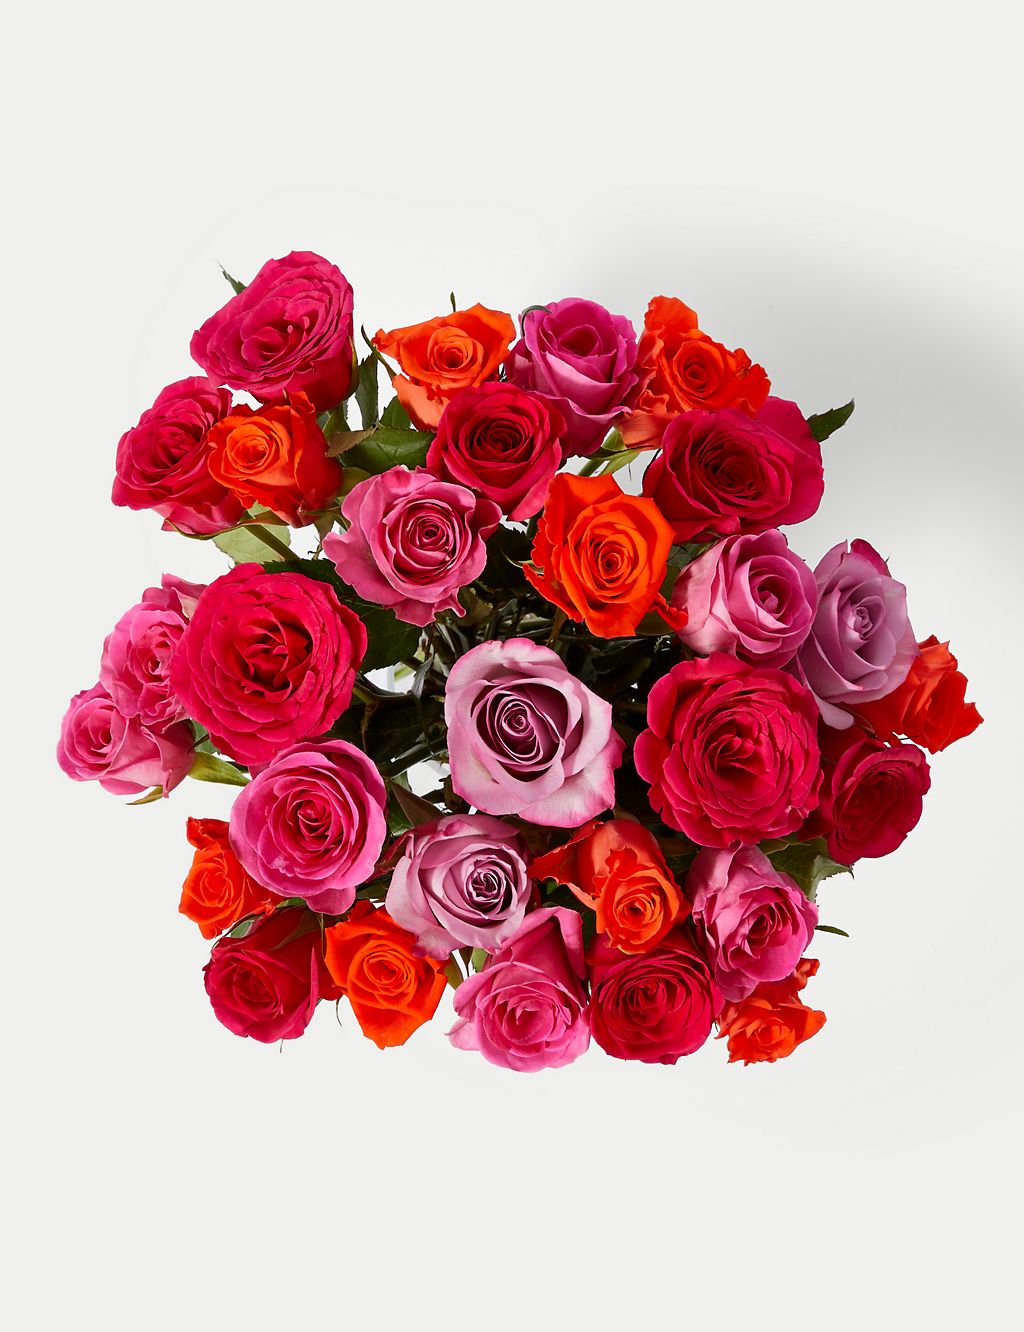 Radiant Rose Abundance with Caramel Collection 1 of 6